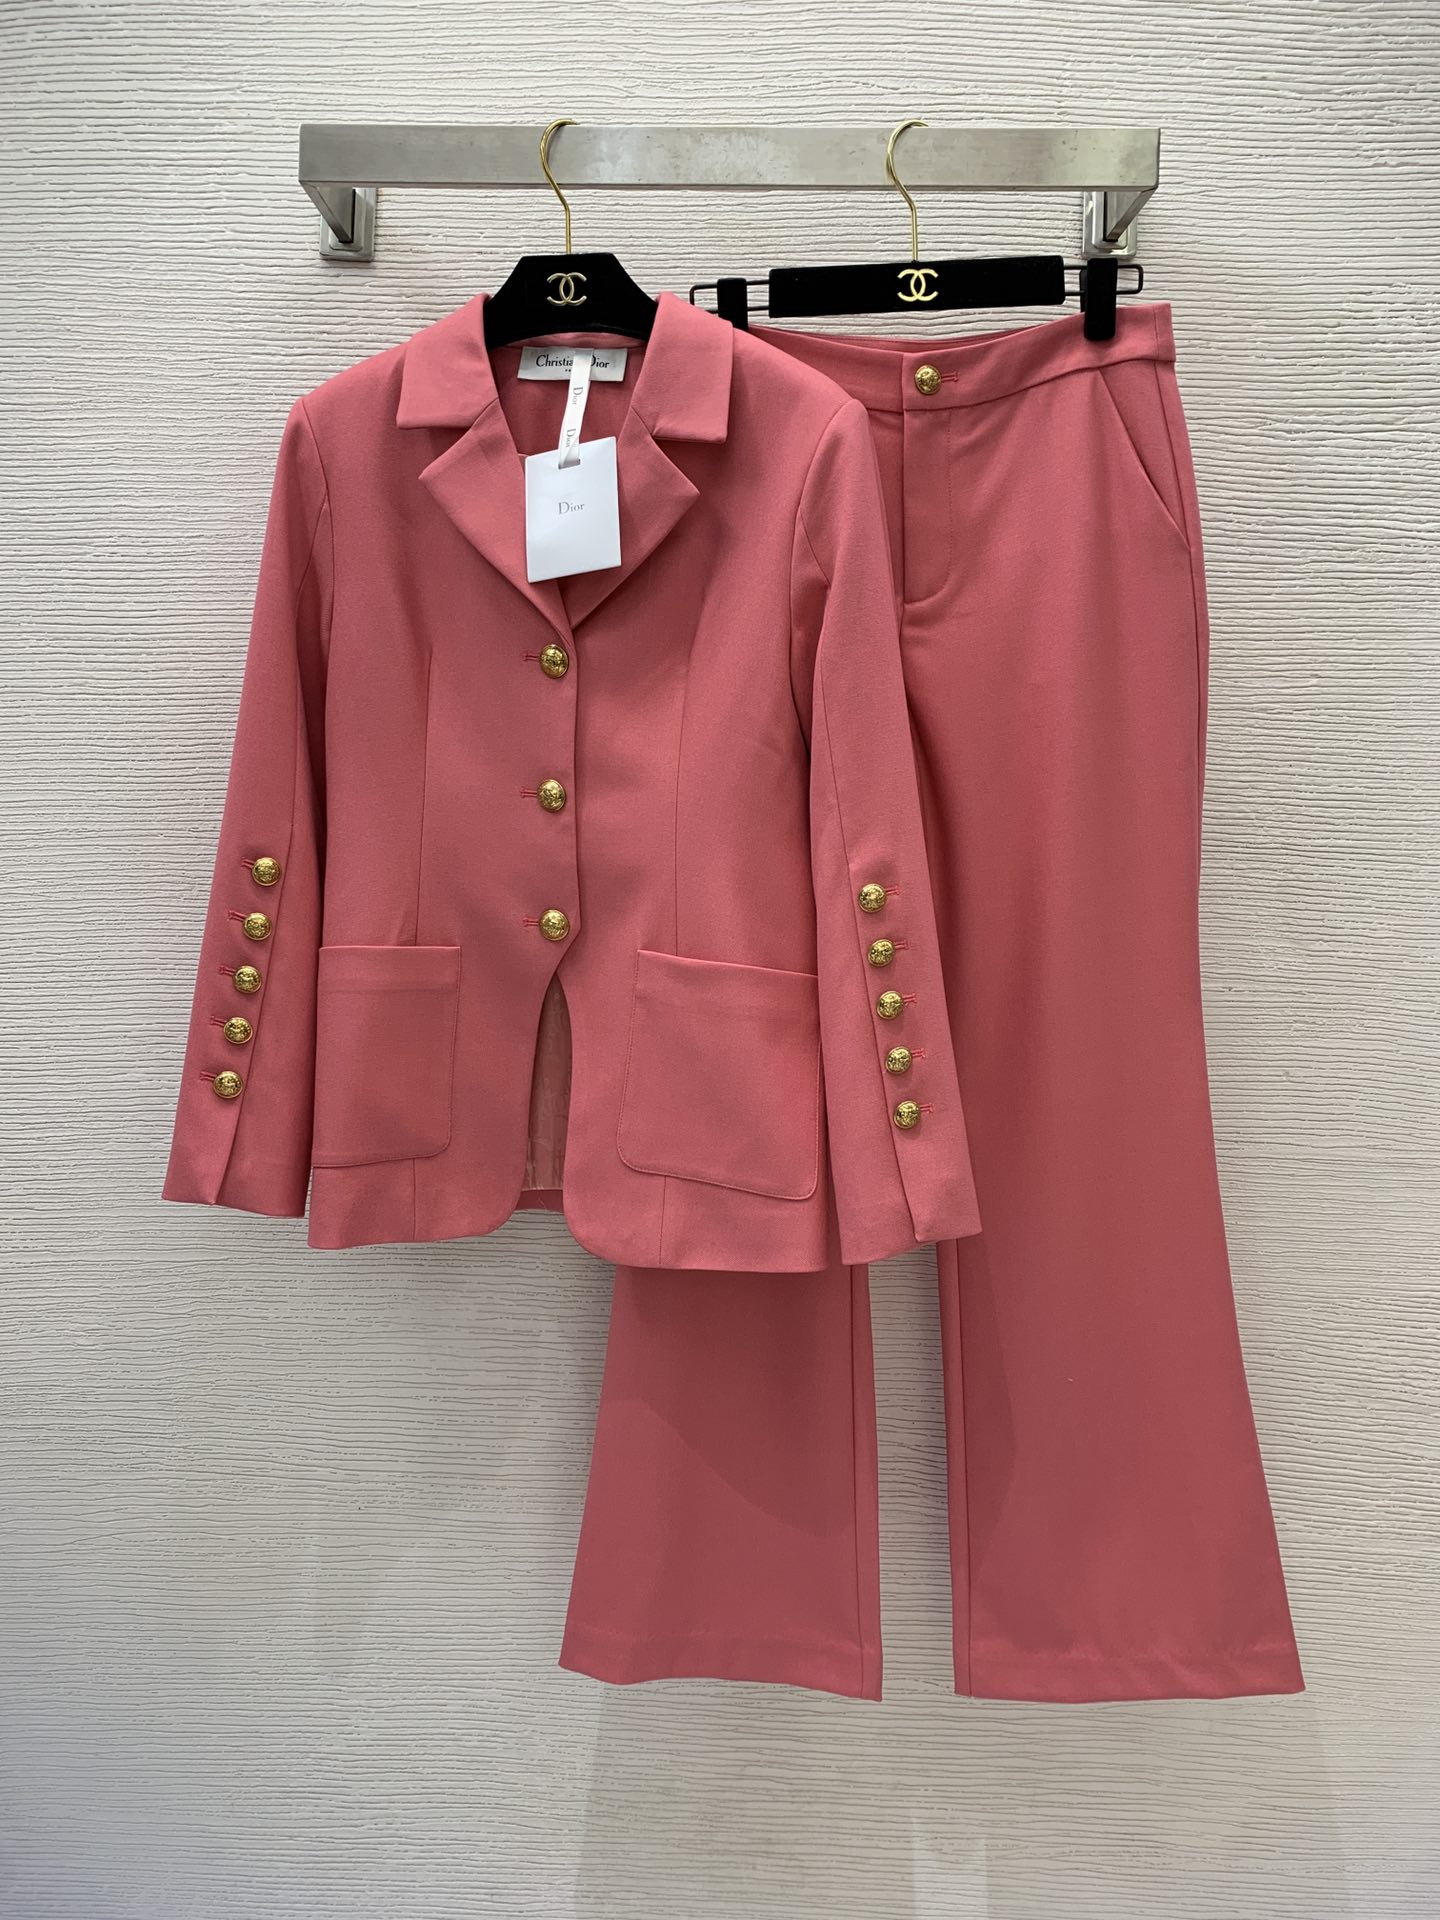 Dior Clothing Coats & Jackets Pants & Trousers Black Khaki Pink Fall/Winter Collection